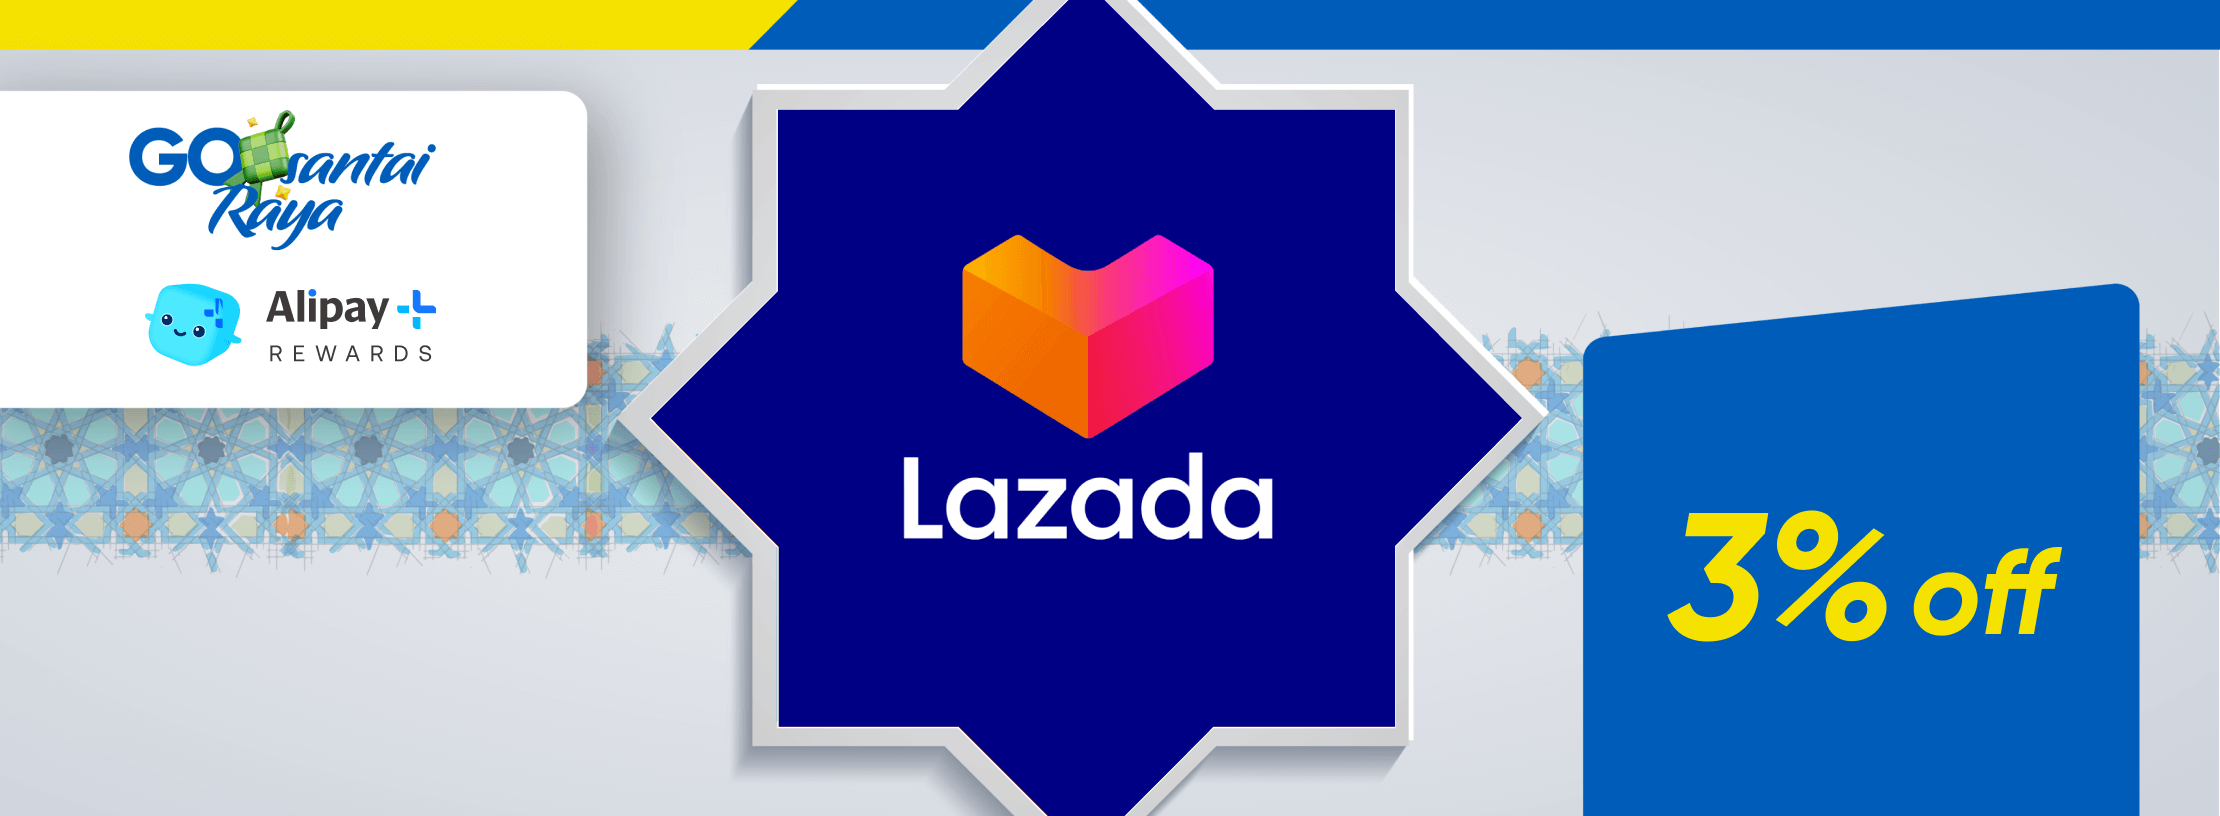 web-banner-2220px-x-816px-lazada.png